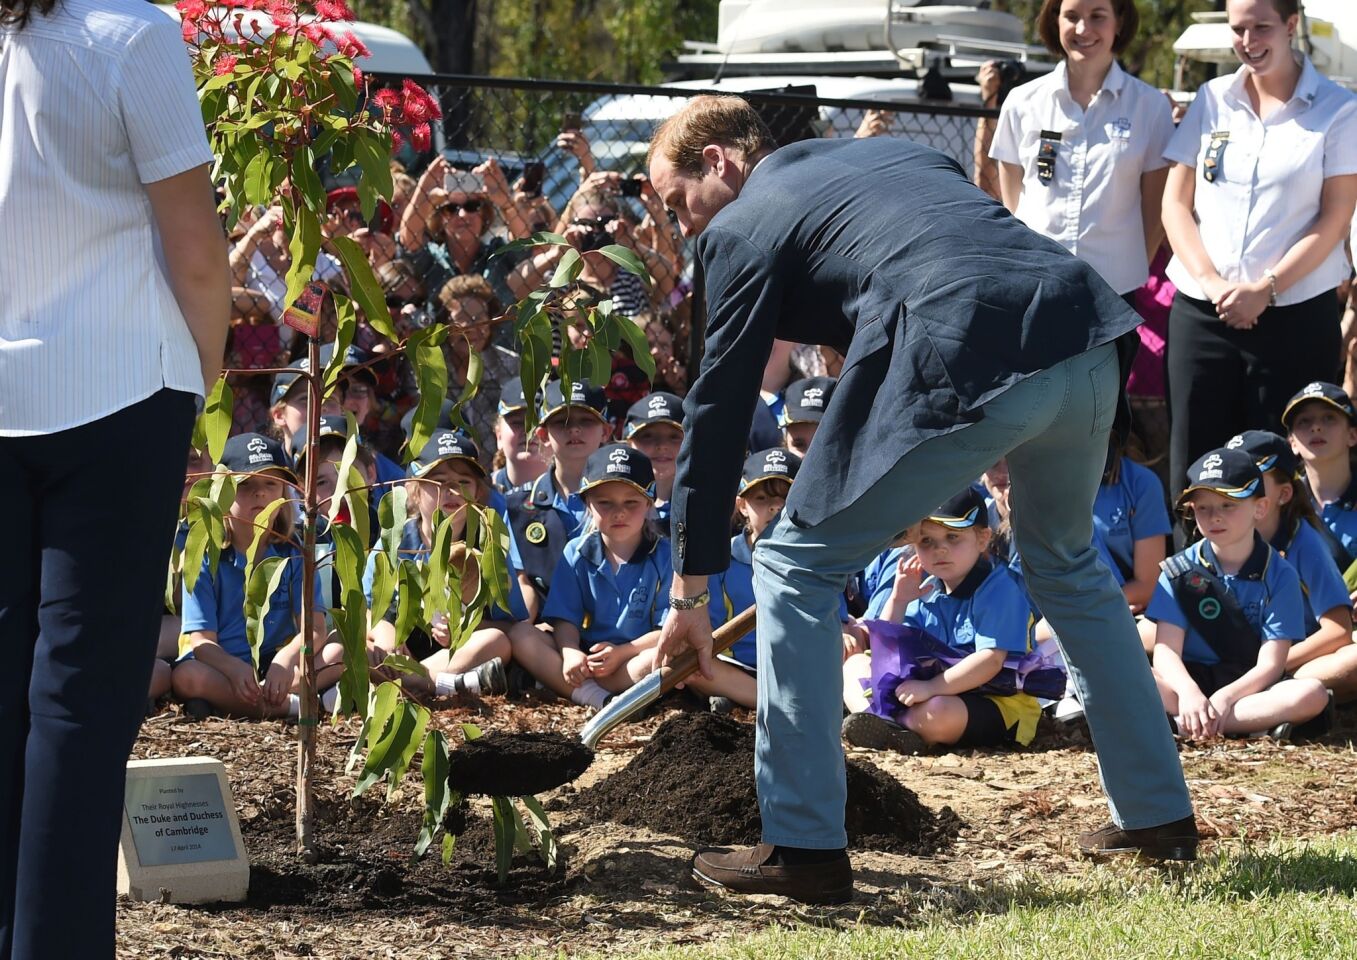 Prince William shovels dirt as he helps plant a tree at a Girl Guide hall at Winmalee, Australia.